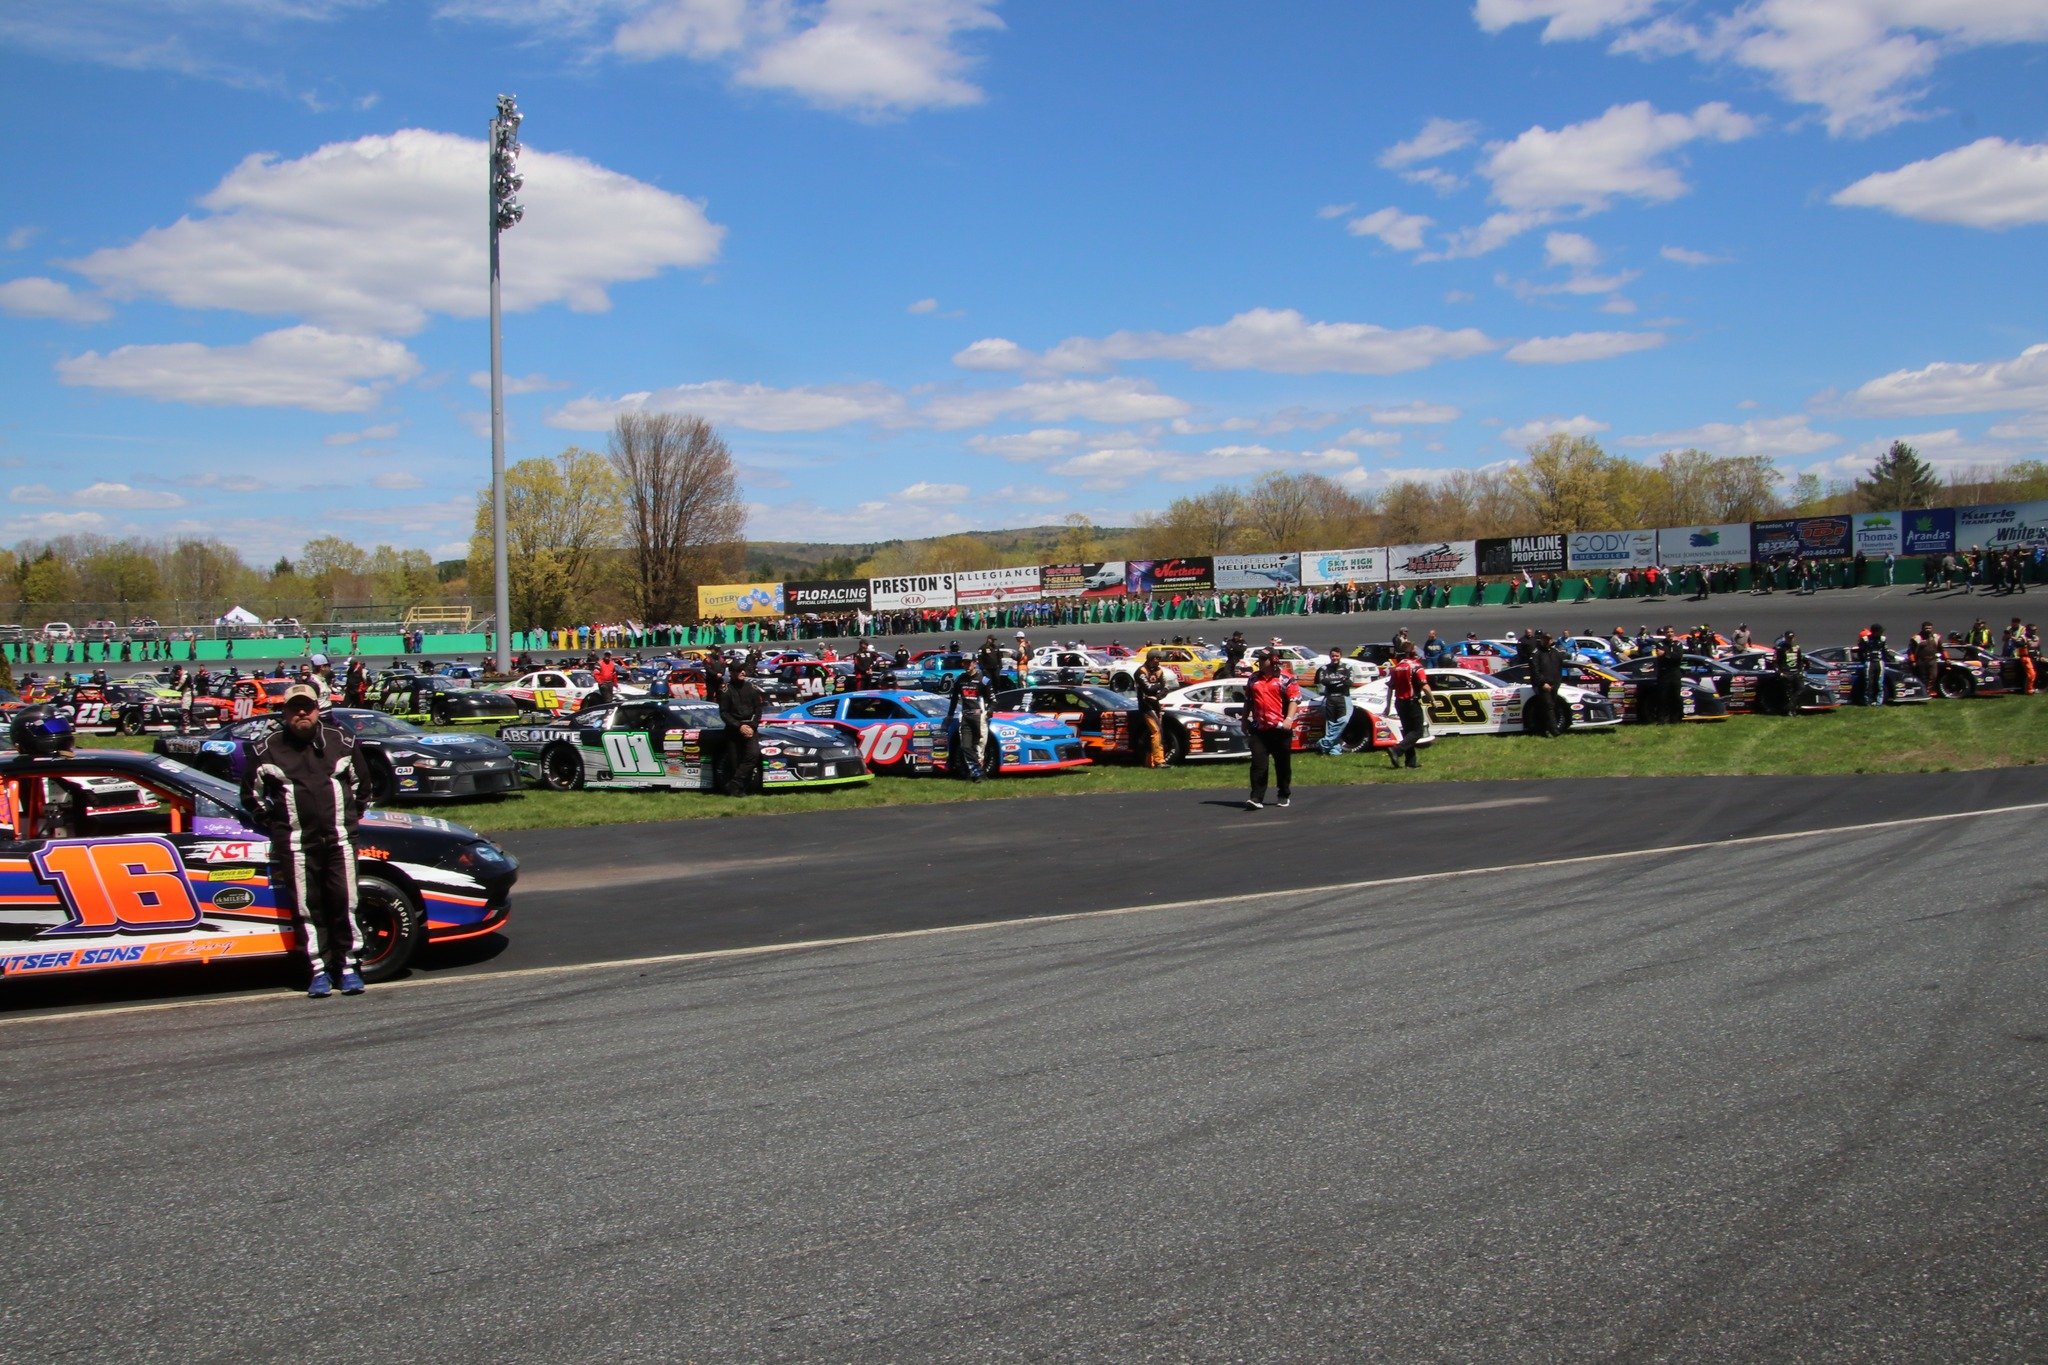 Fans, Teams Revved Up and Ready for @communitybankna Opening Weekend at Thunder Road! - Read more at thunderroadvt.com

Saturday, May 4th - Annual Car Show, the Kenley Dean Extravaganza and Practice Day

Sunday, May 5th - The 26th annual Community Ba